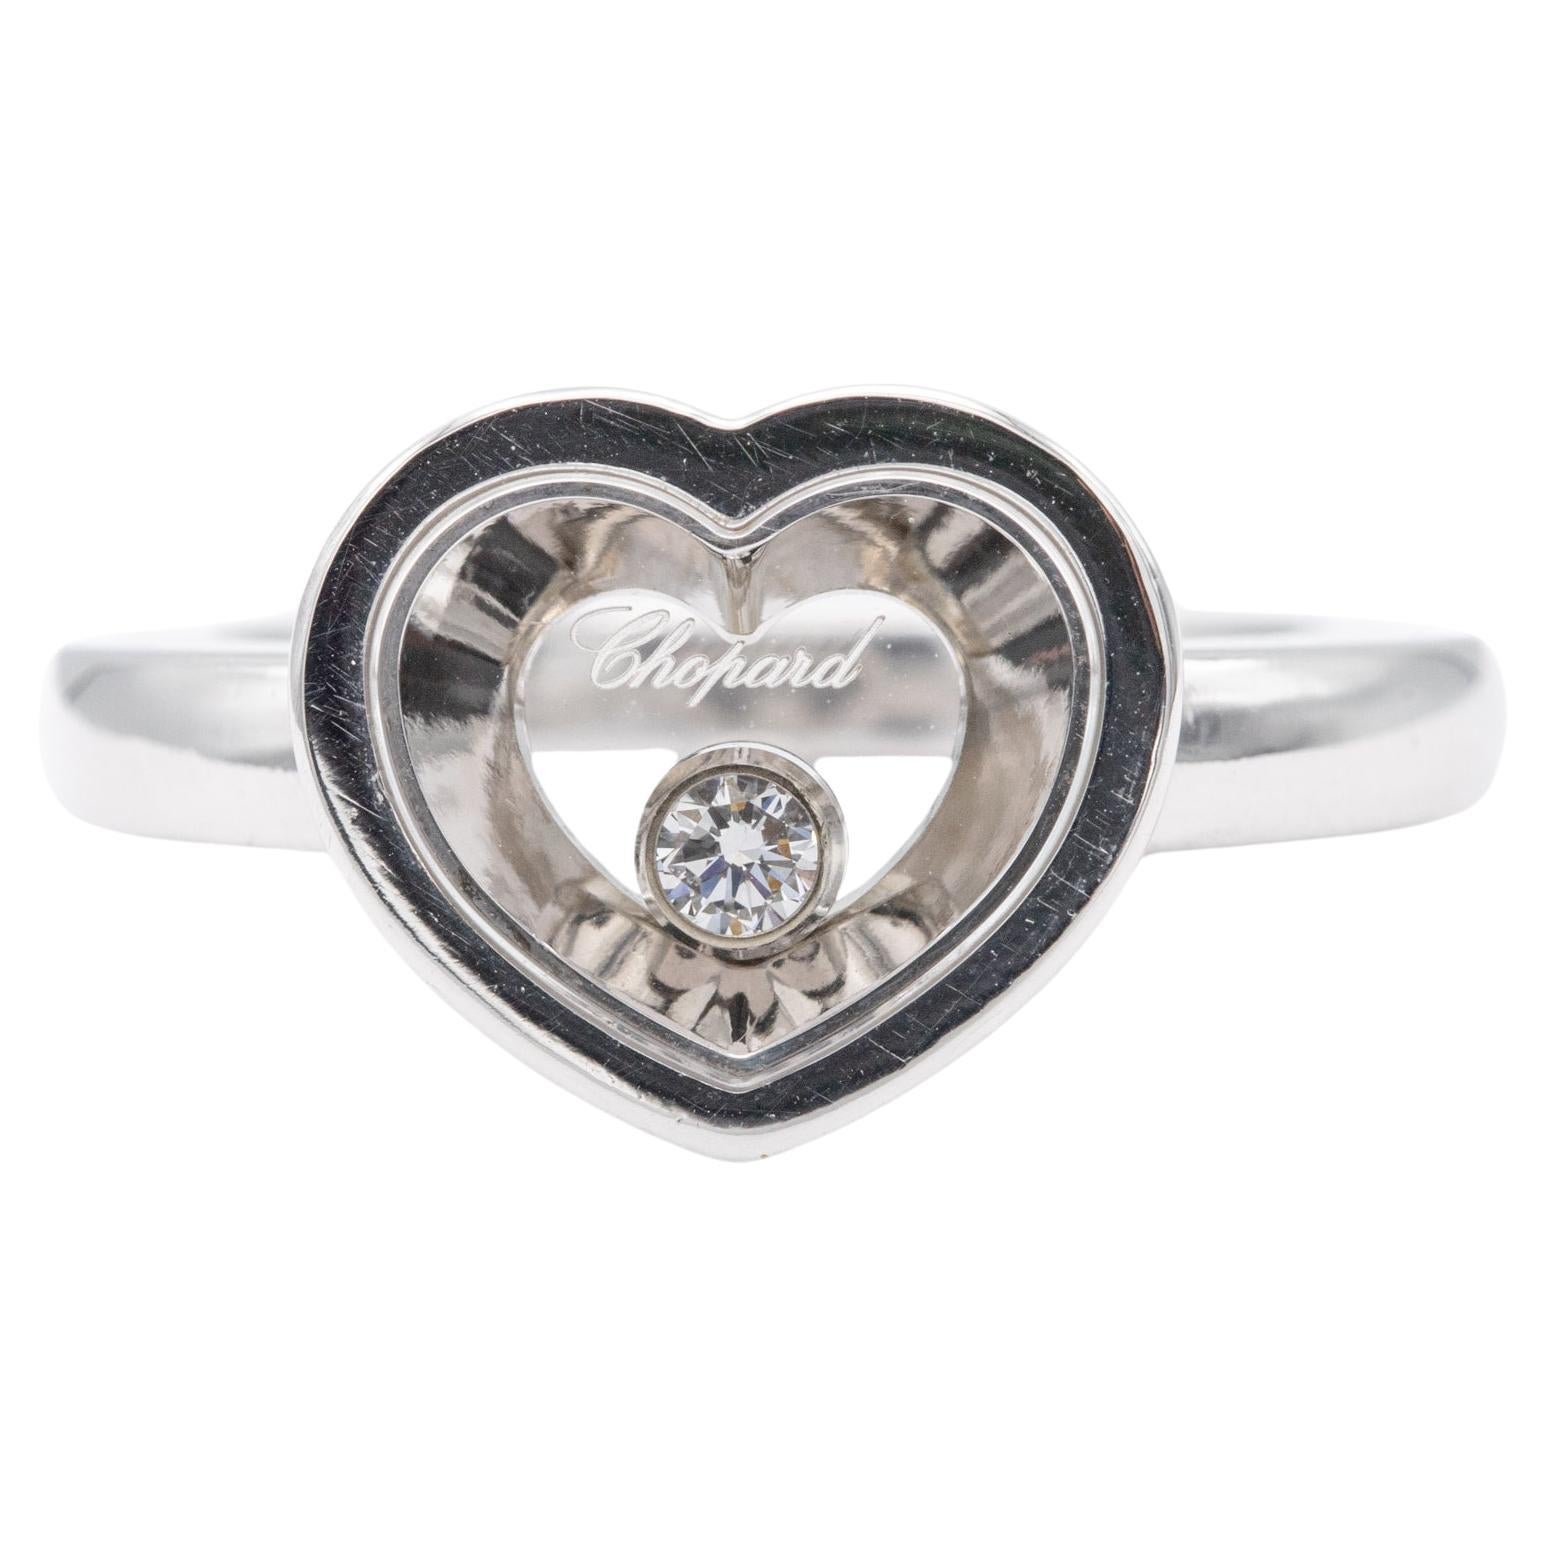 For sale is this wonderful and timeless Chopard ring. This heart shaped ring is from Chopards 'Happy Diamonds' collection. This 18 k white gold ring is holds one brilliant cut diamond which is set between two crystal glasses, making it able to move